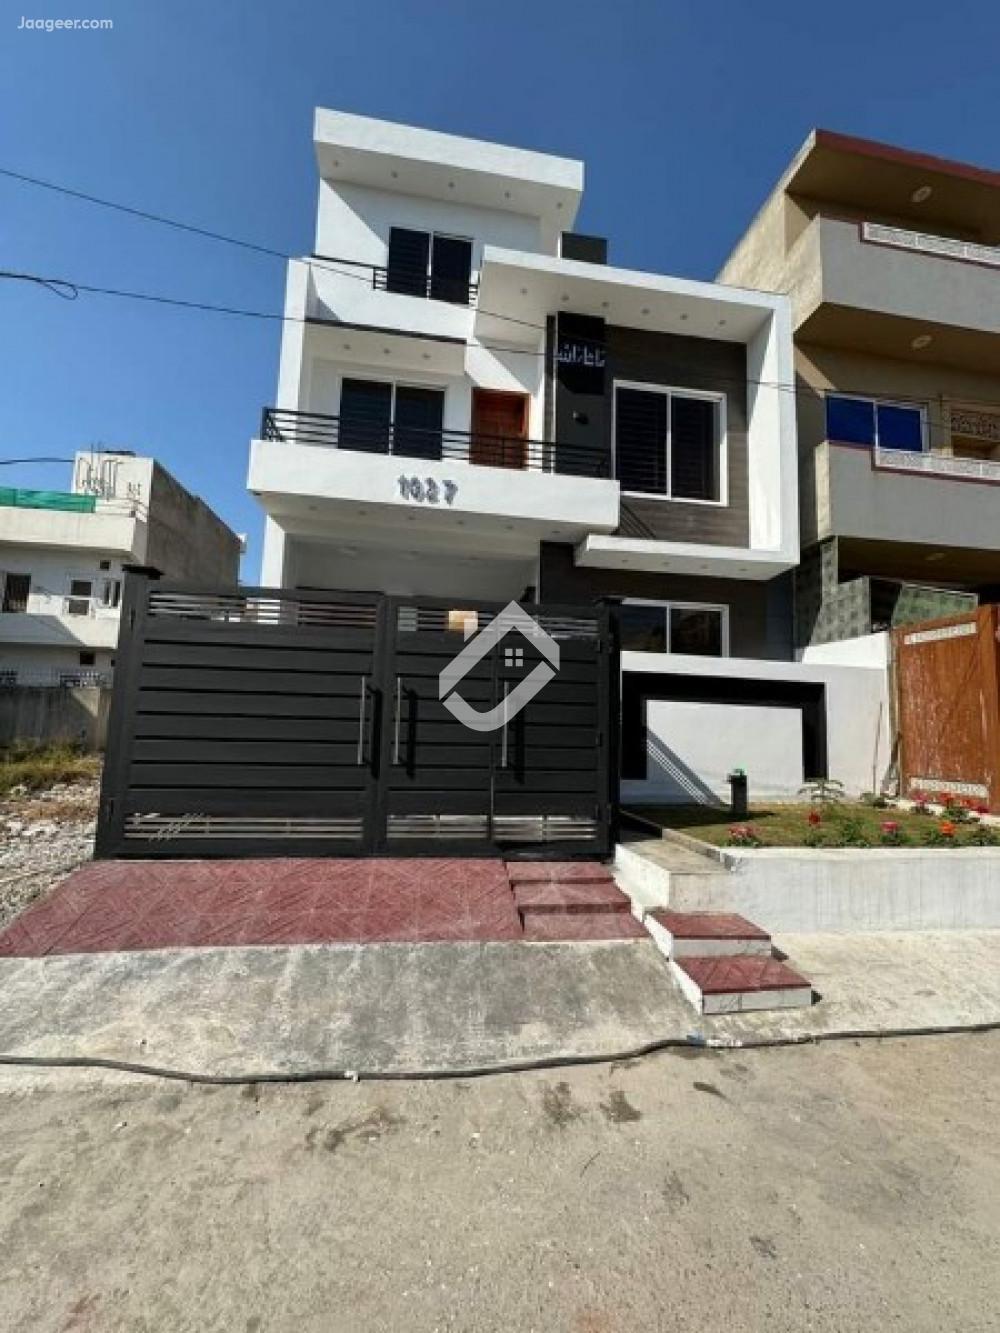 View  4 Marla House For Sale In G-14 Nearby Metro Station and Kashmir Highway in G-14, Islamabad